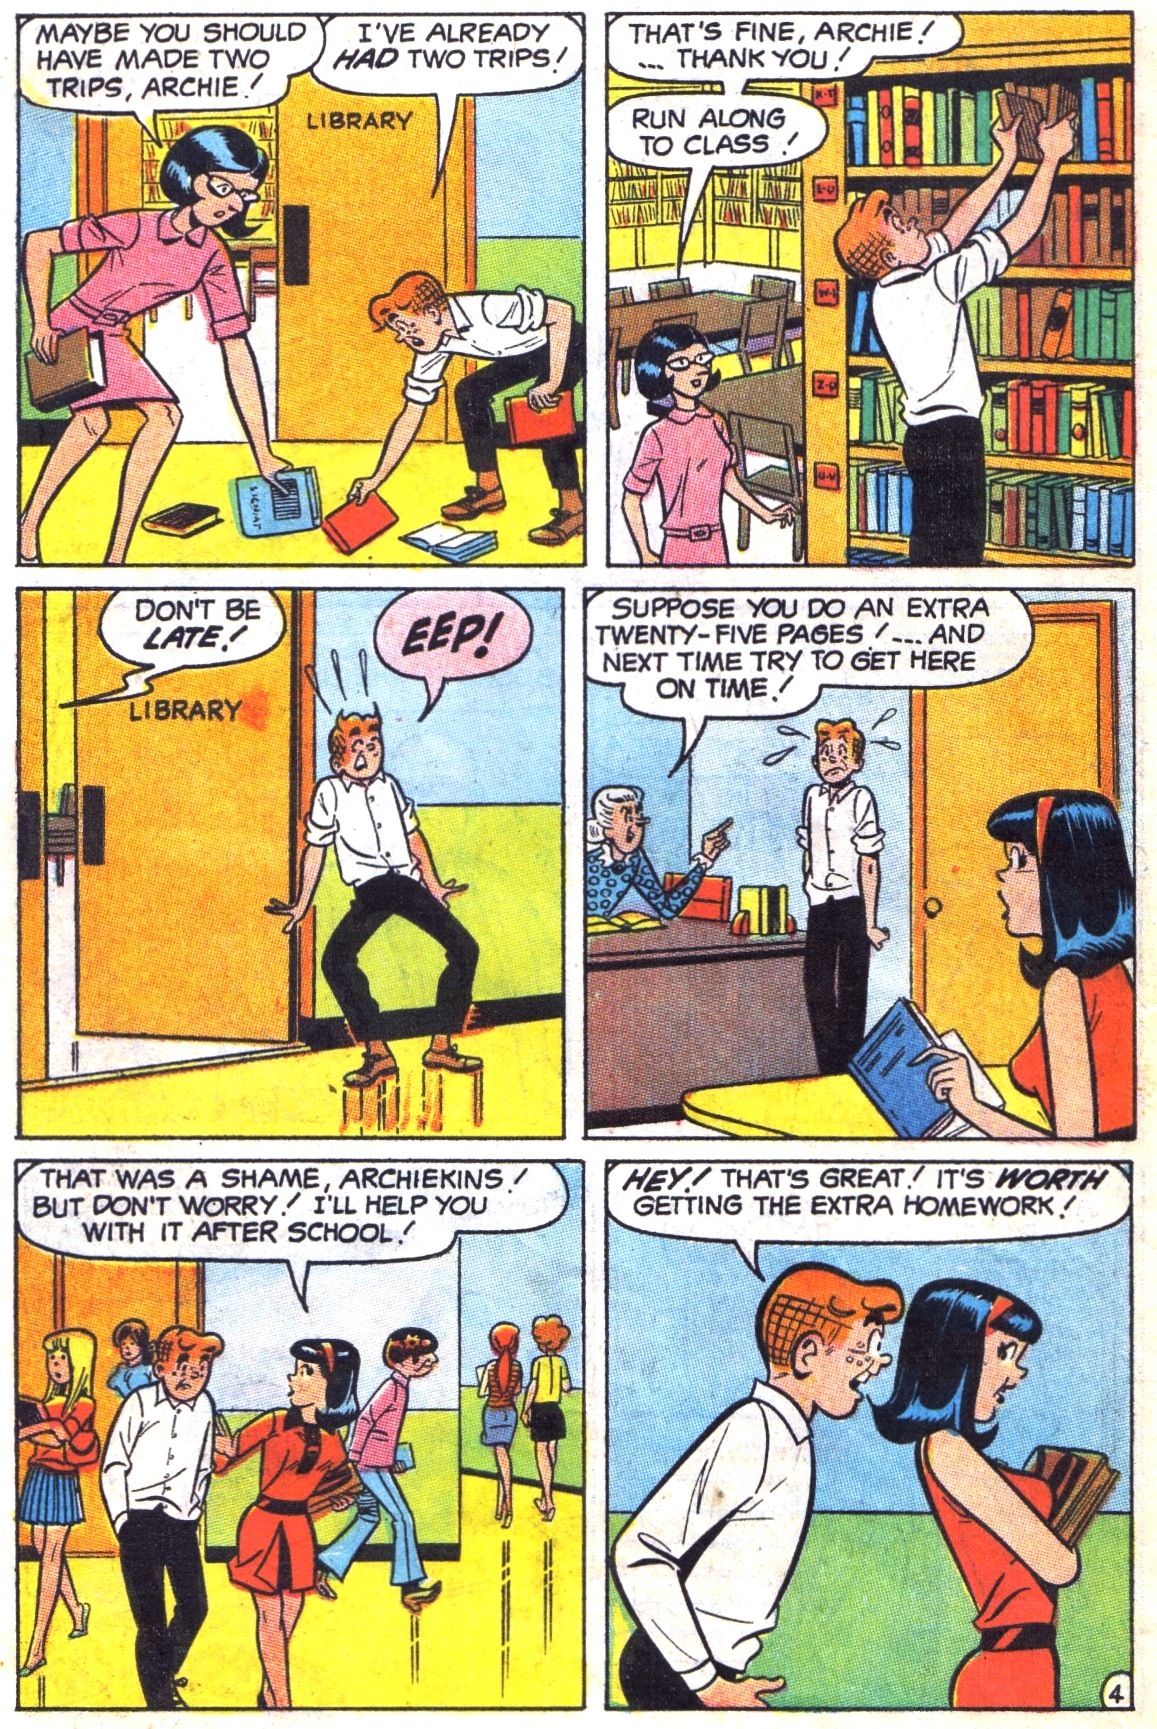 Archie (1960) 187 Page 6